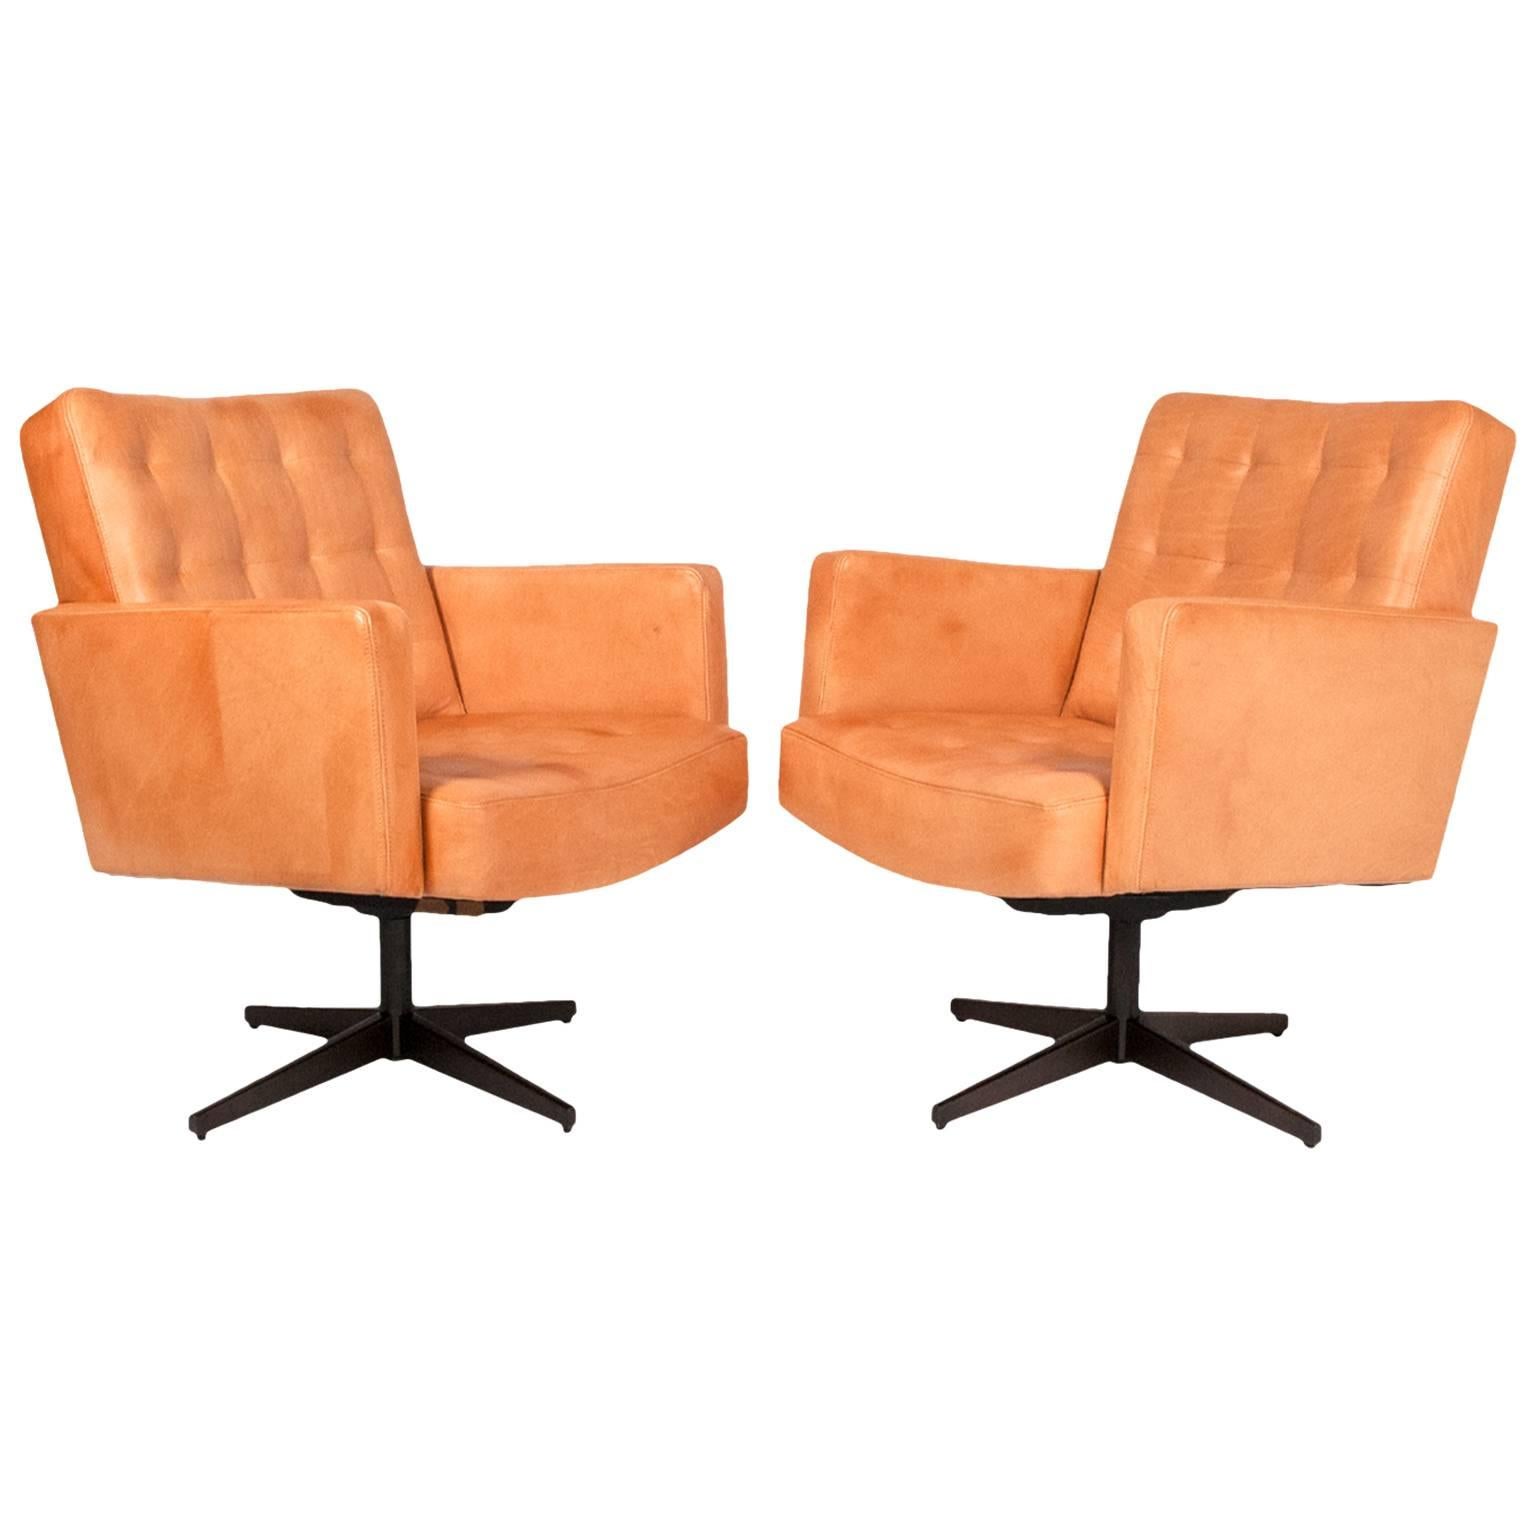 Pair of Lounge Chairs by Vincent Cafiero for Knoll